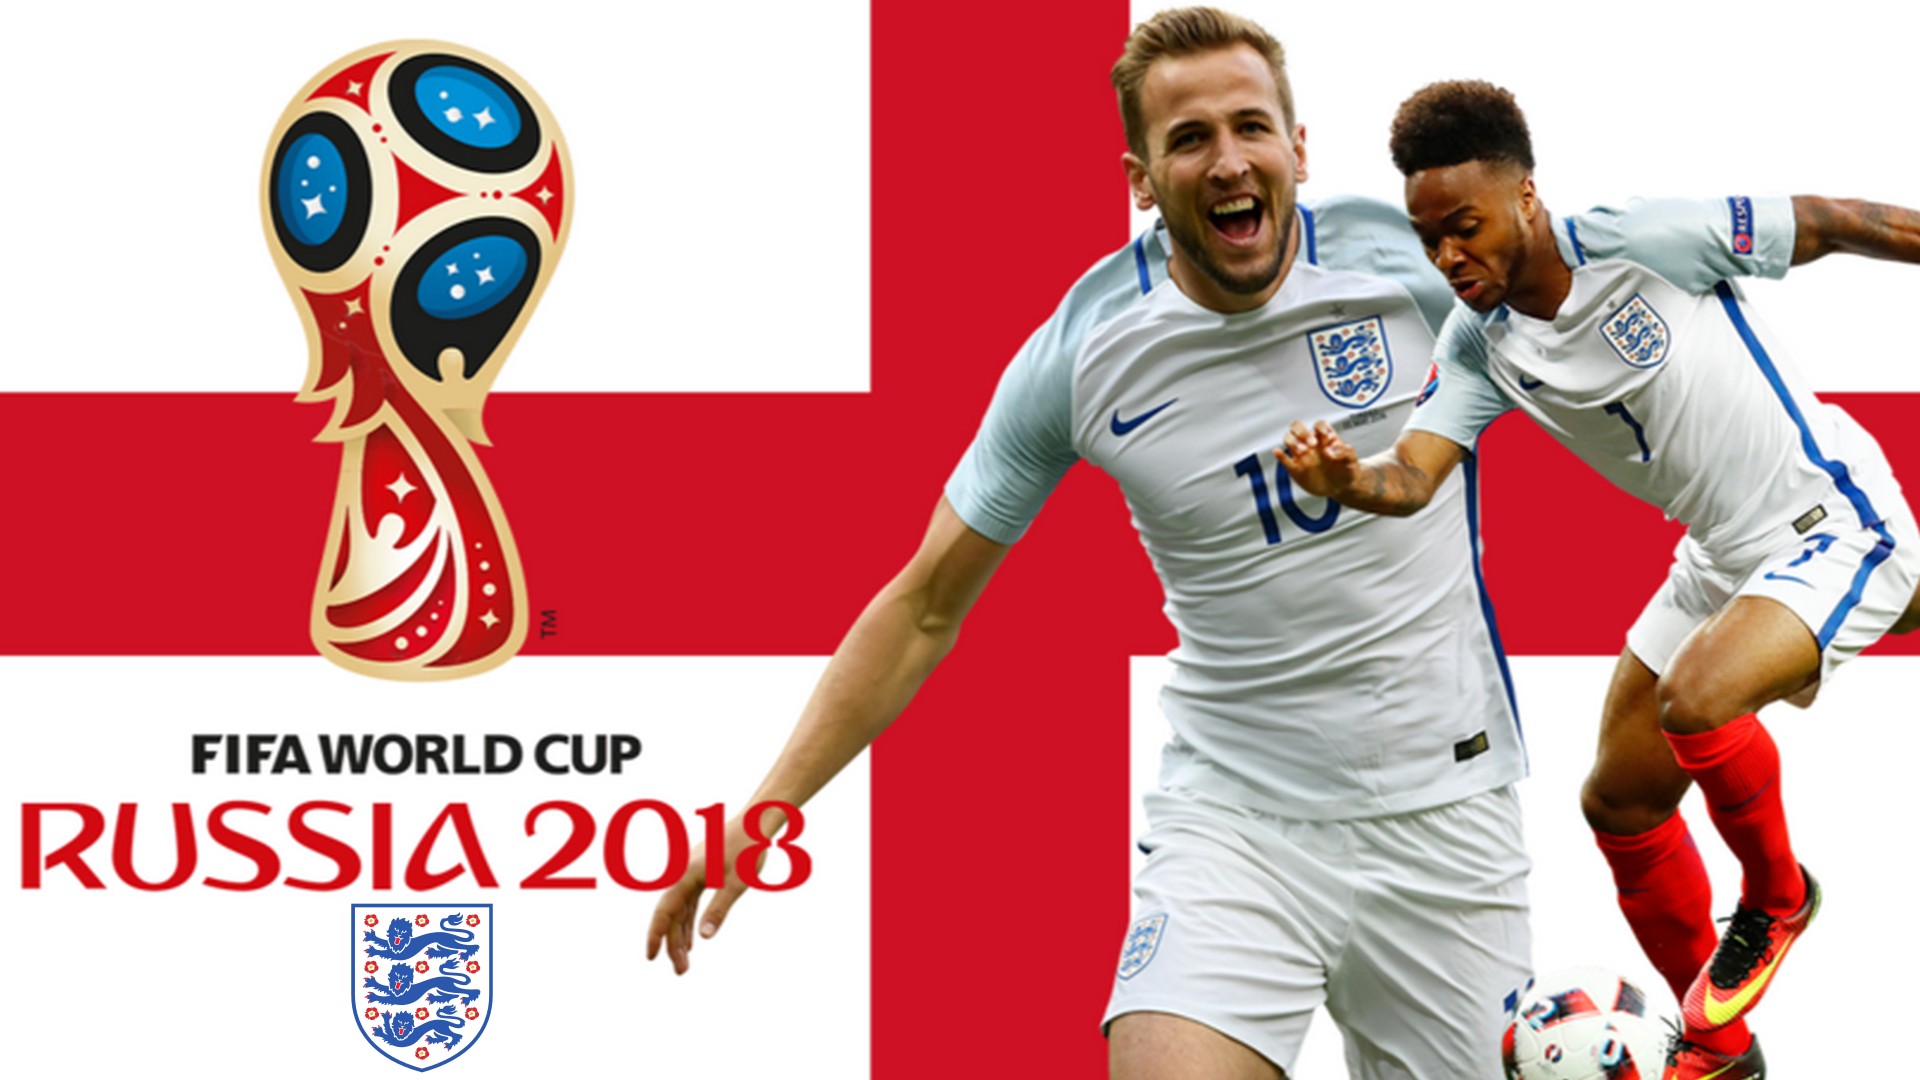 2018 England World Cup Wallpaper HD with resolution 1920x1080 pixel. You can make this wallpaper for your Mac or Windows Desktop Background, iPhone, Android or Tablet and another Smartphone device